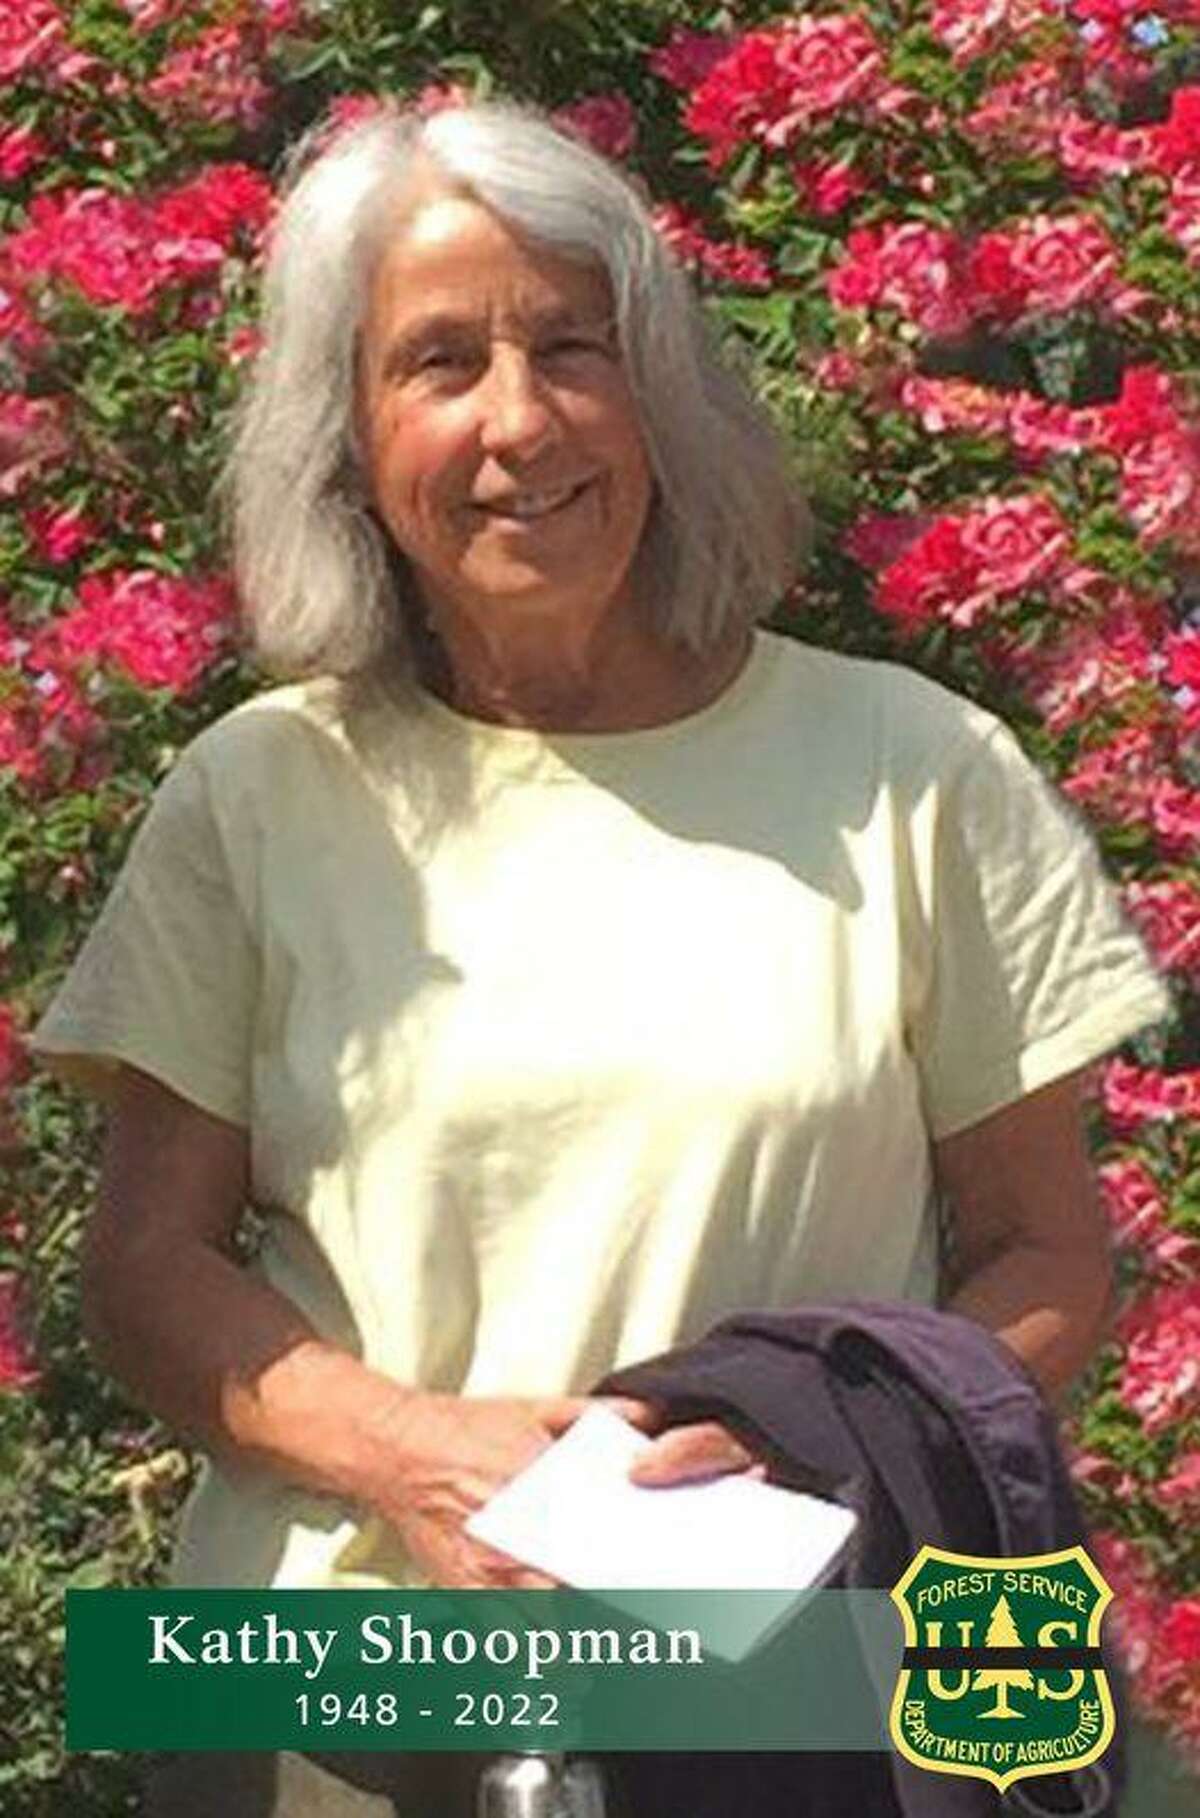 Kathy Shoopman, a fire lookout for the U.S. Forest Service, died in the McKinney Fire, forest service officials said Monday.